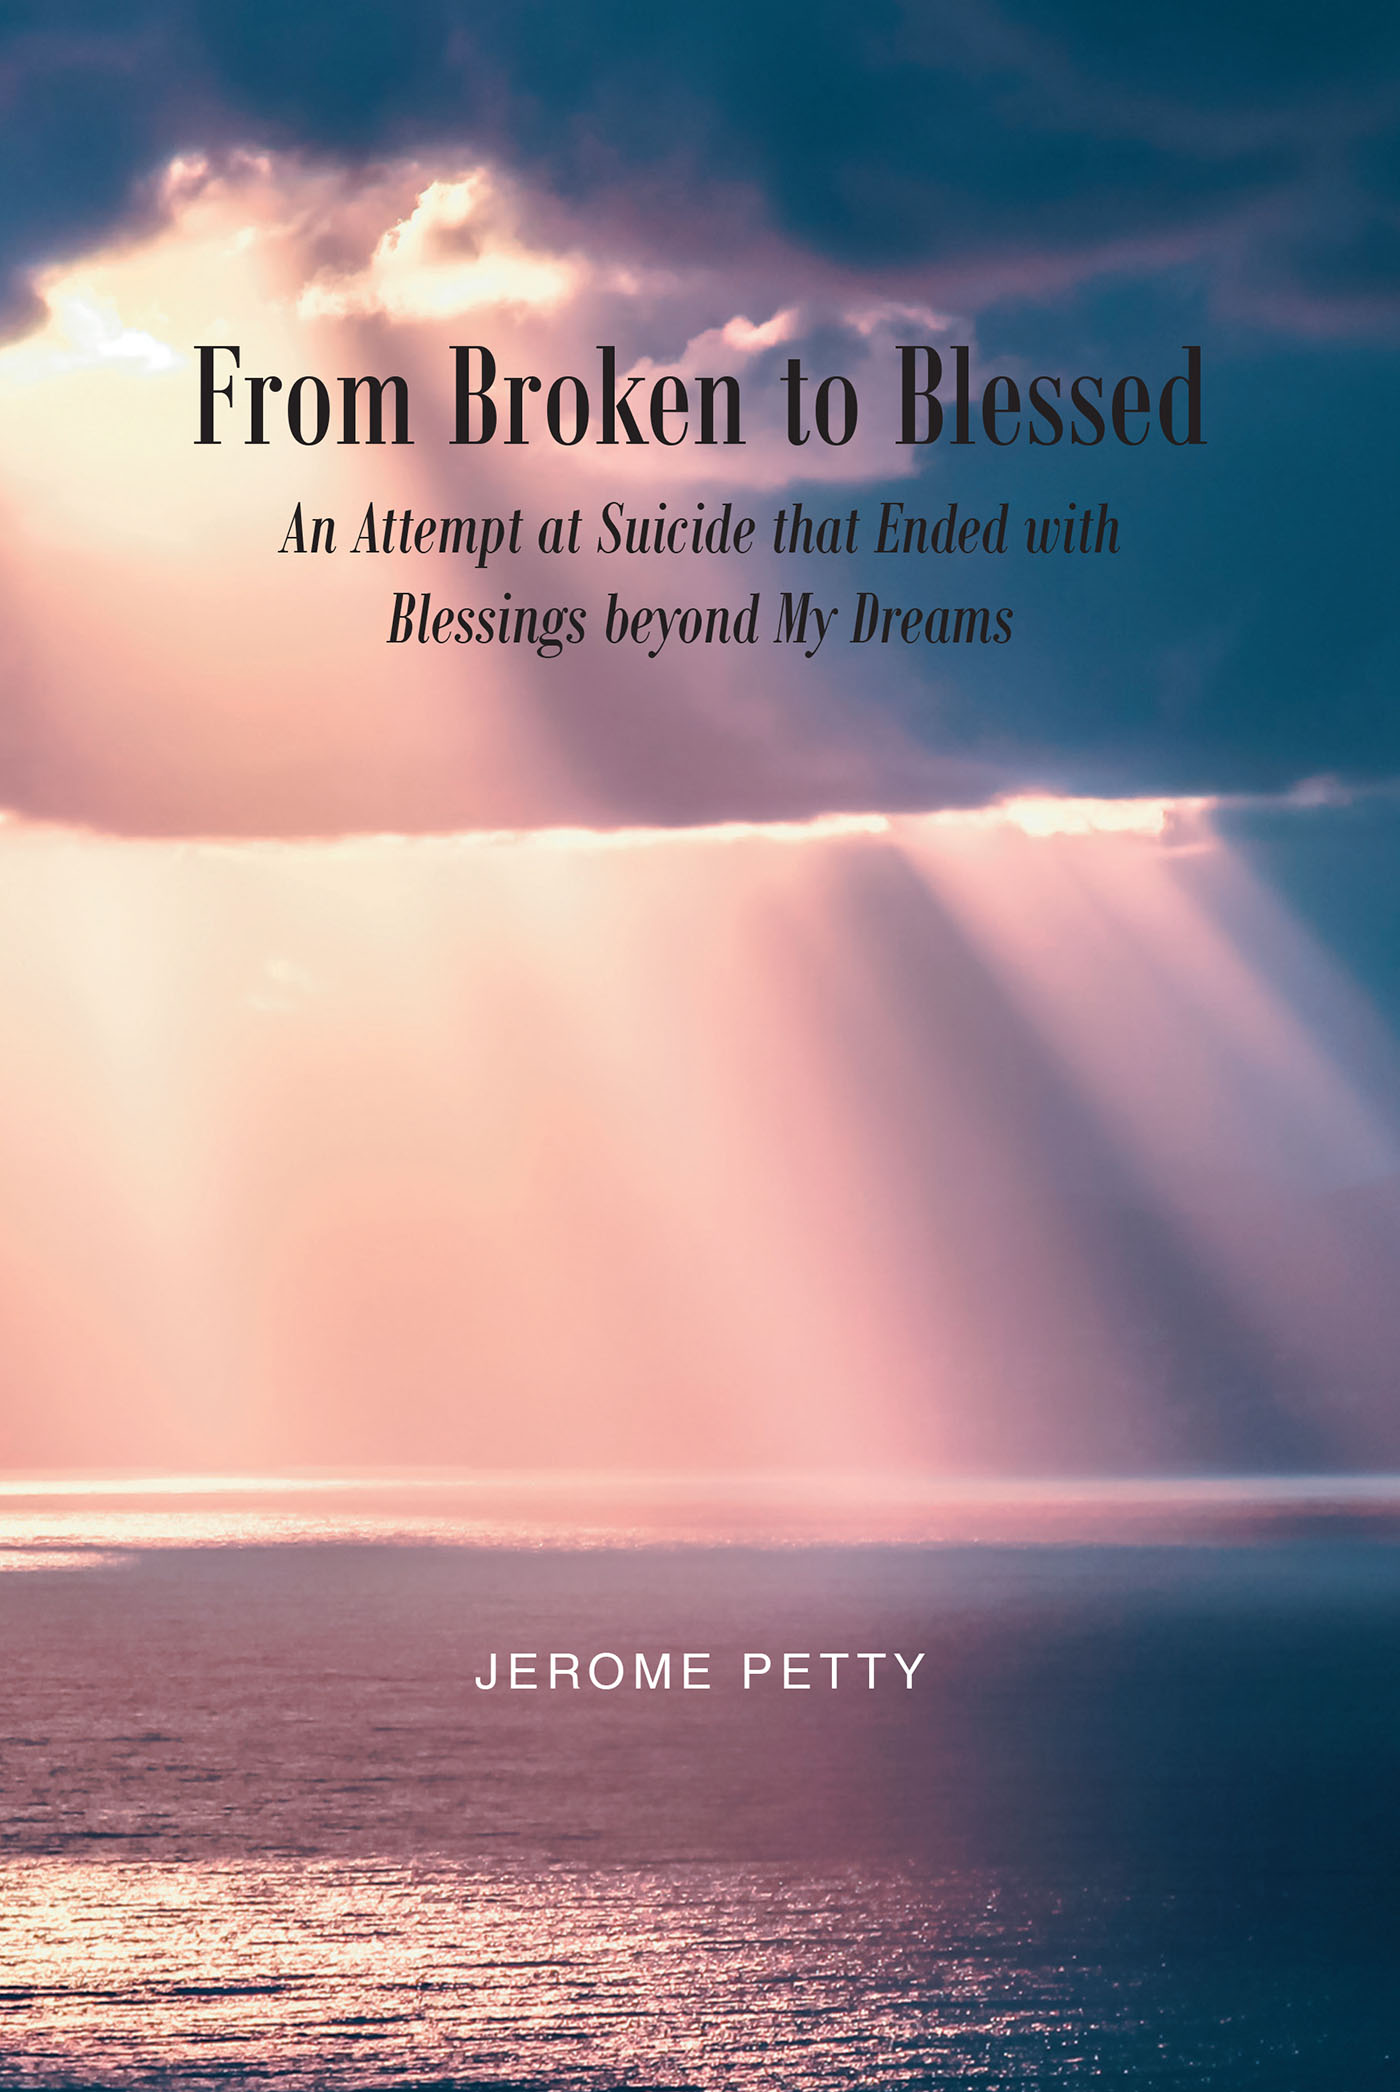 Jerome Petty’s Newly Released “From Broken to Blessed: An Attempt at Suicide that Ended with Blessings beyond My Dreams” is a Potent Personal Memoir